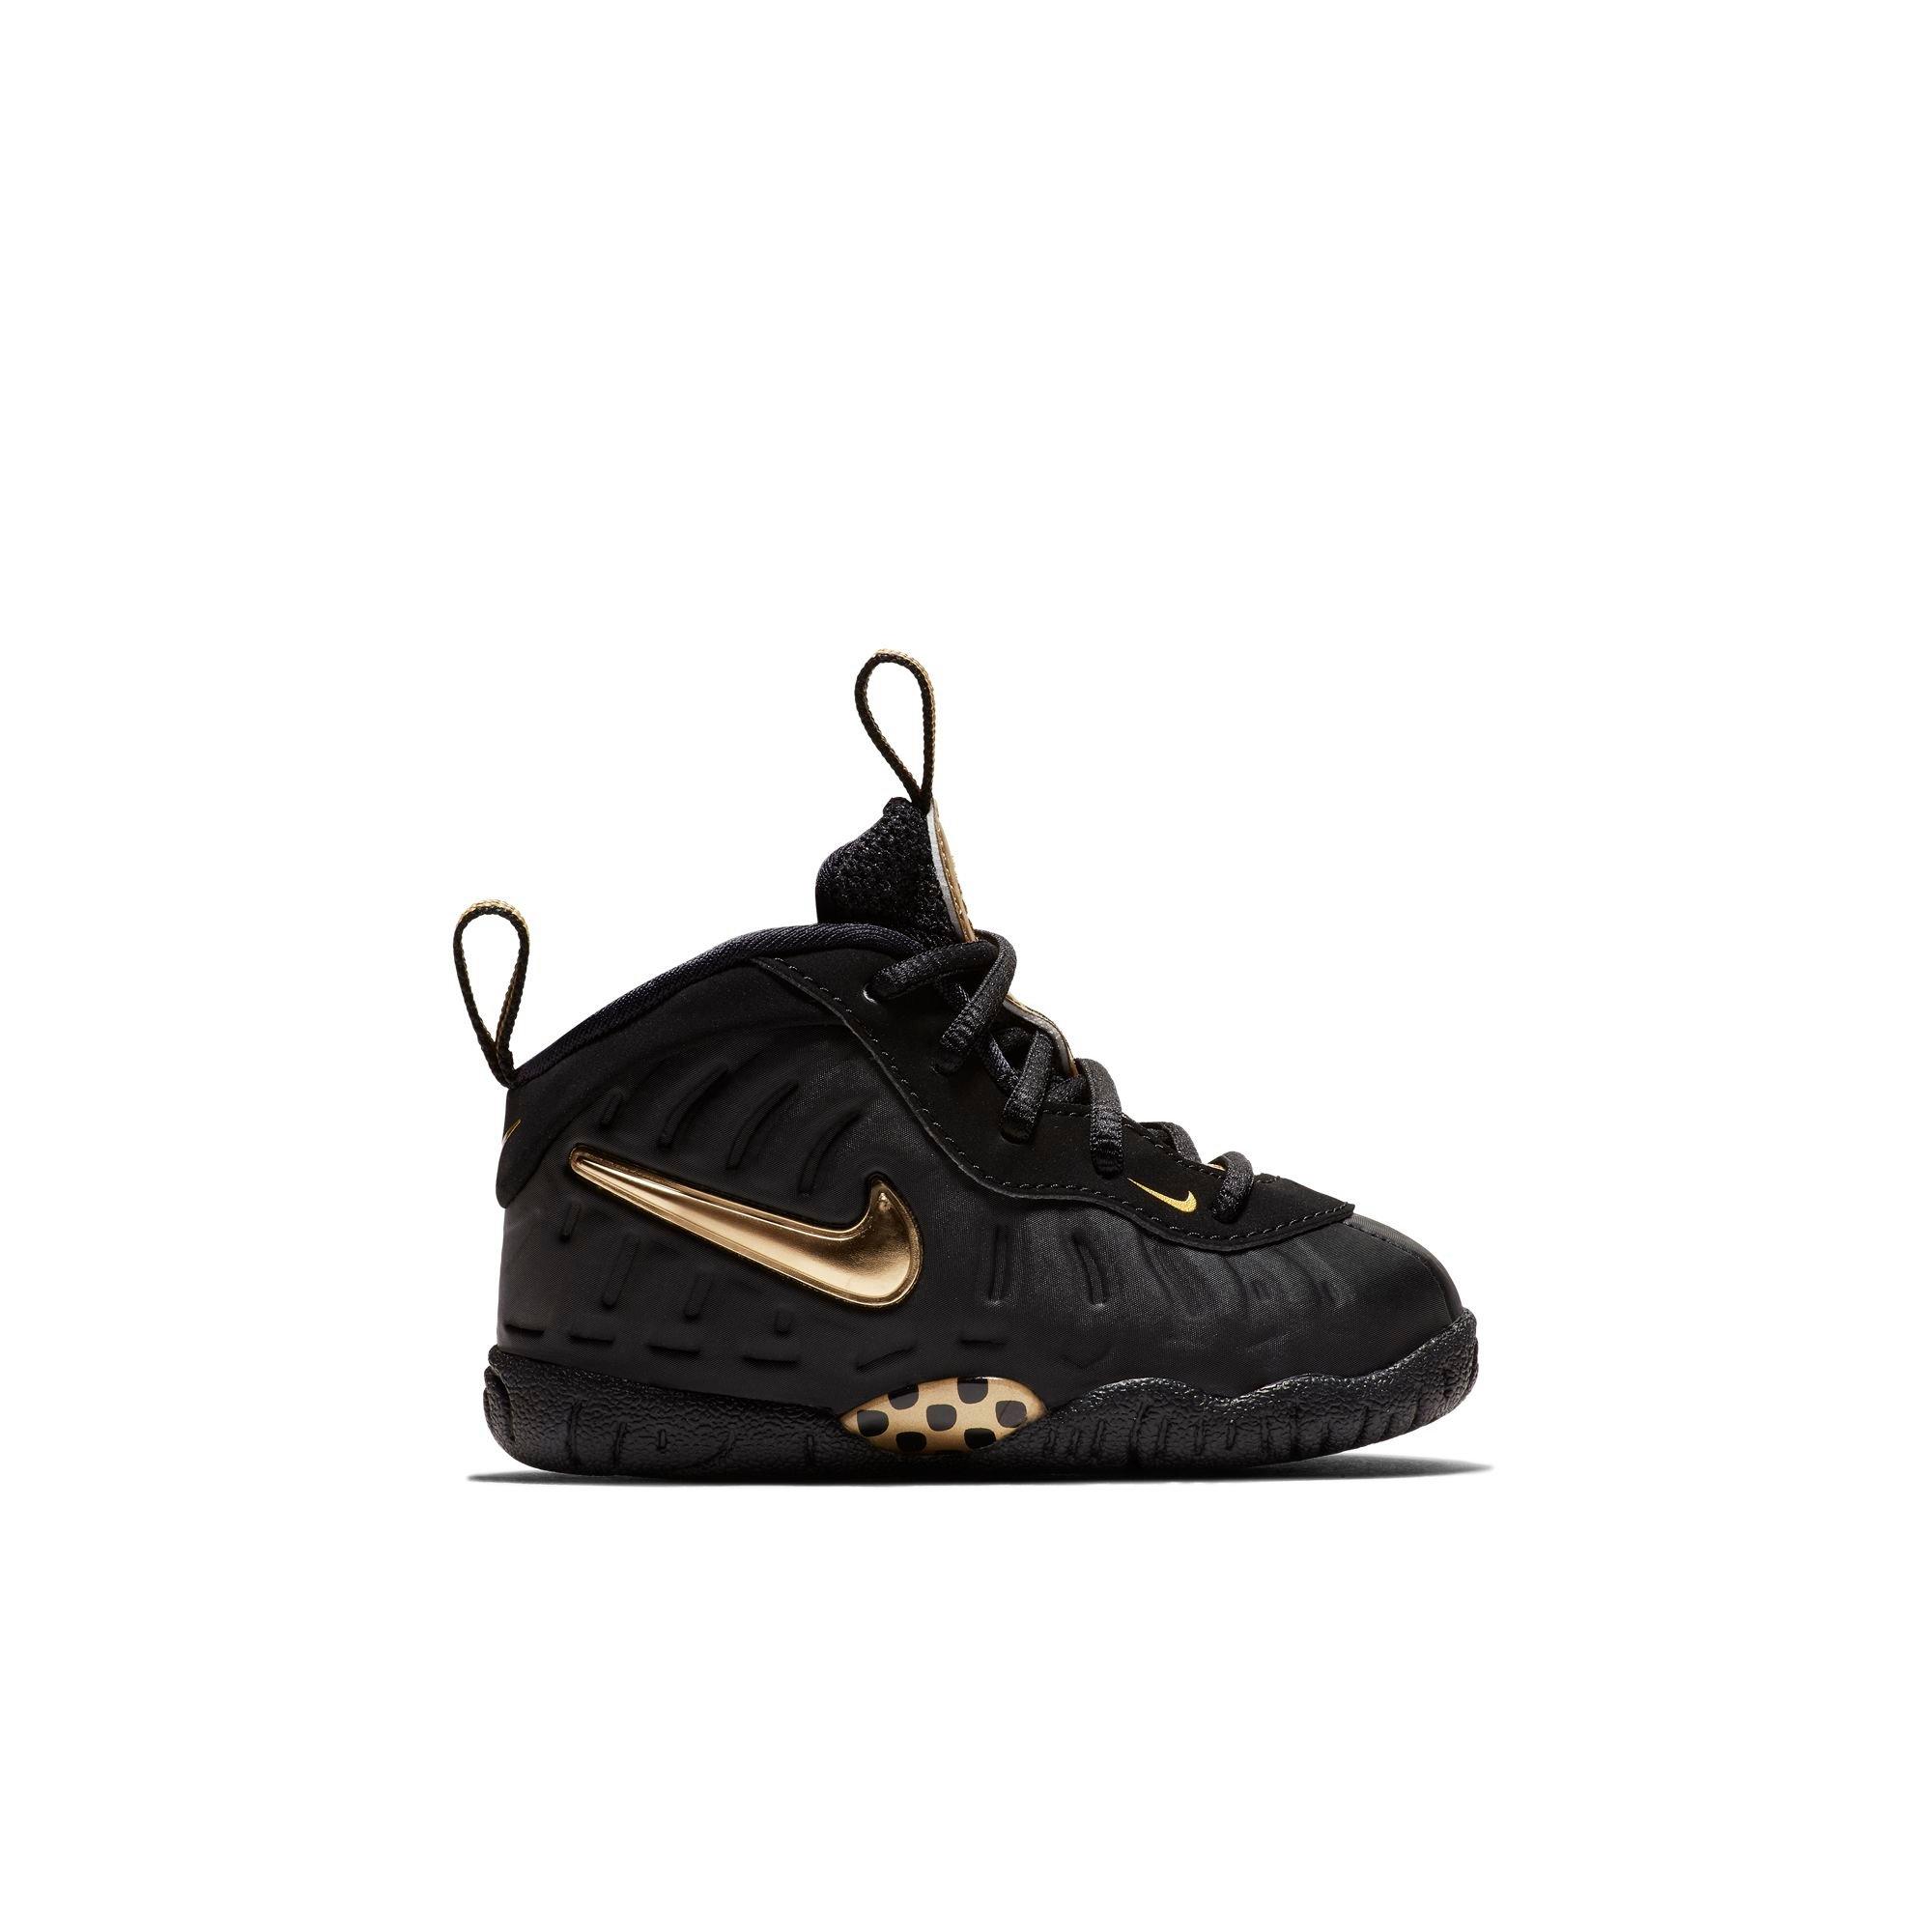 black and gold foamposite toddler